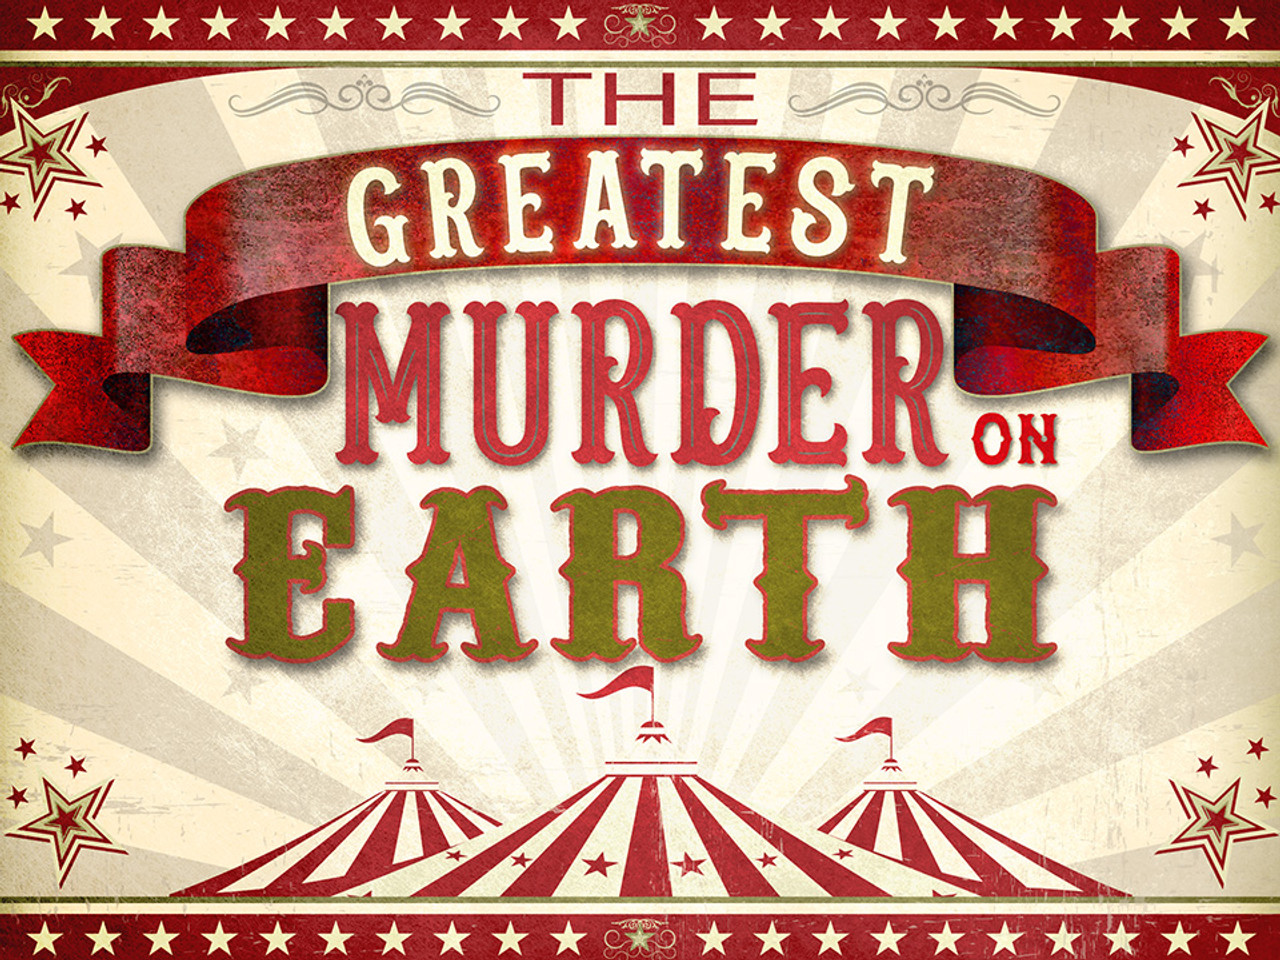 Greatest Murder - a circus mystery party